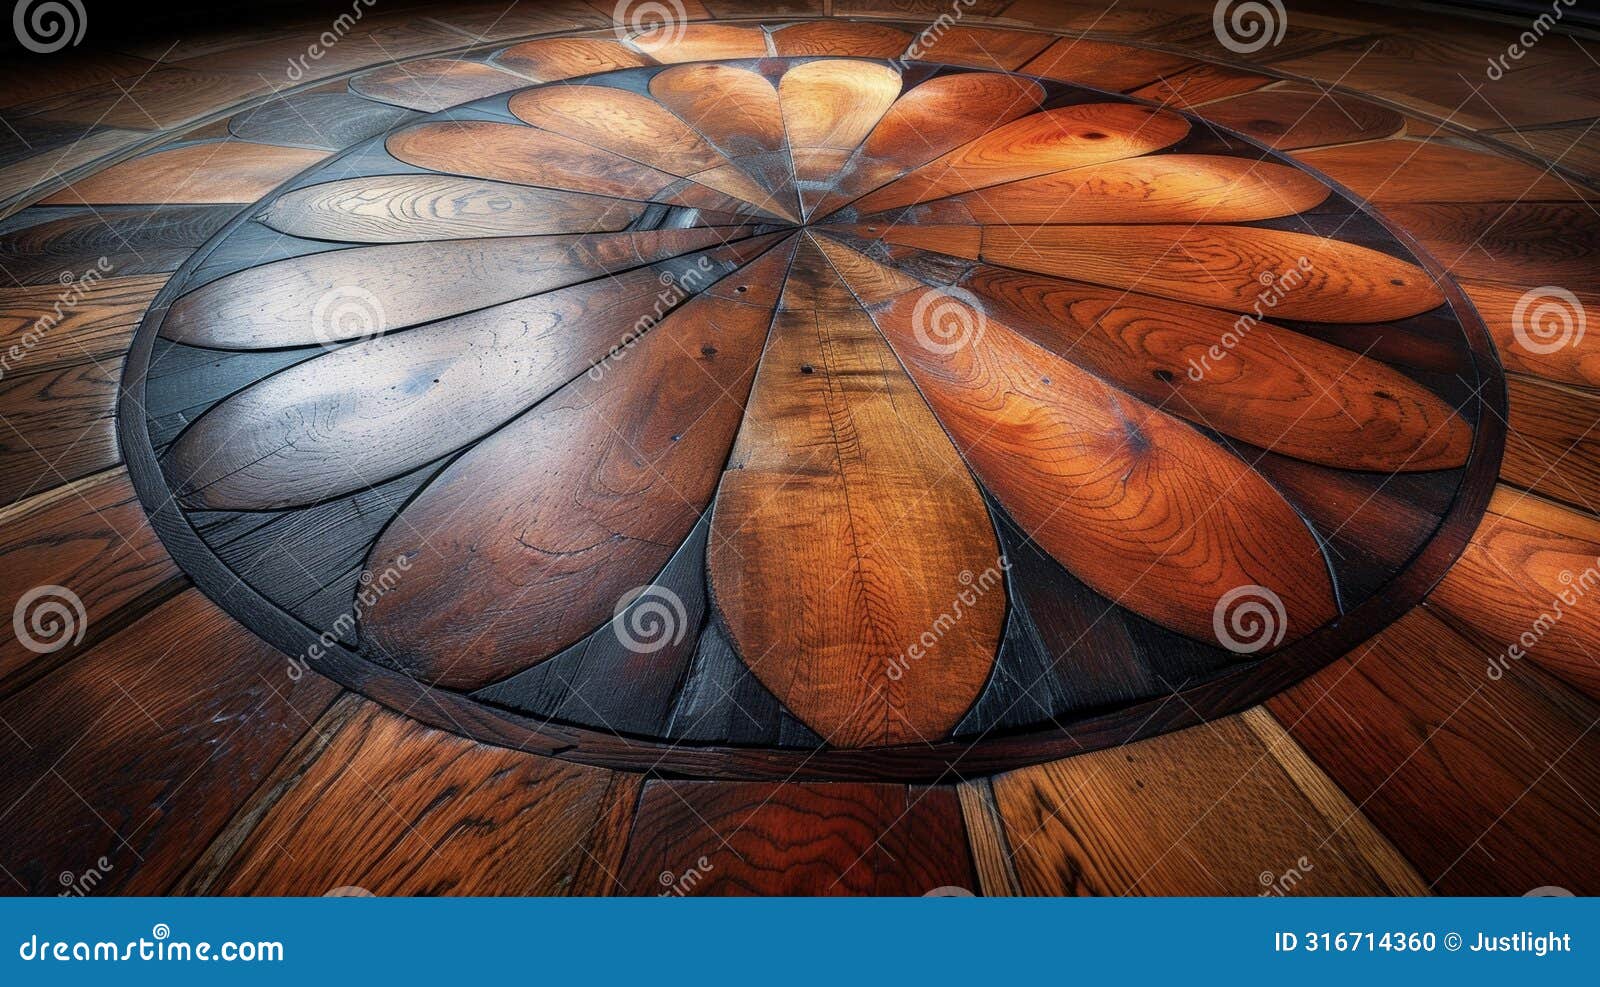 macro shot of a marquetry hardwood floor featuring a stunning geometric  in varying shades of brown